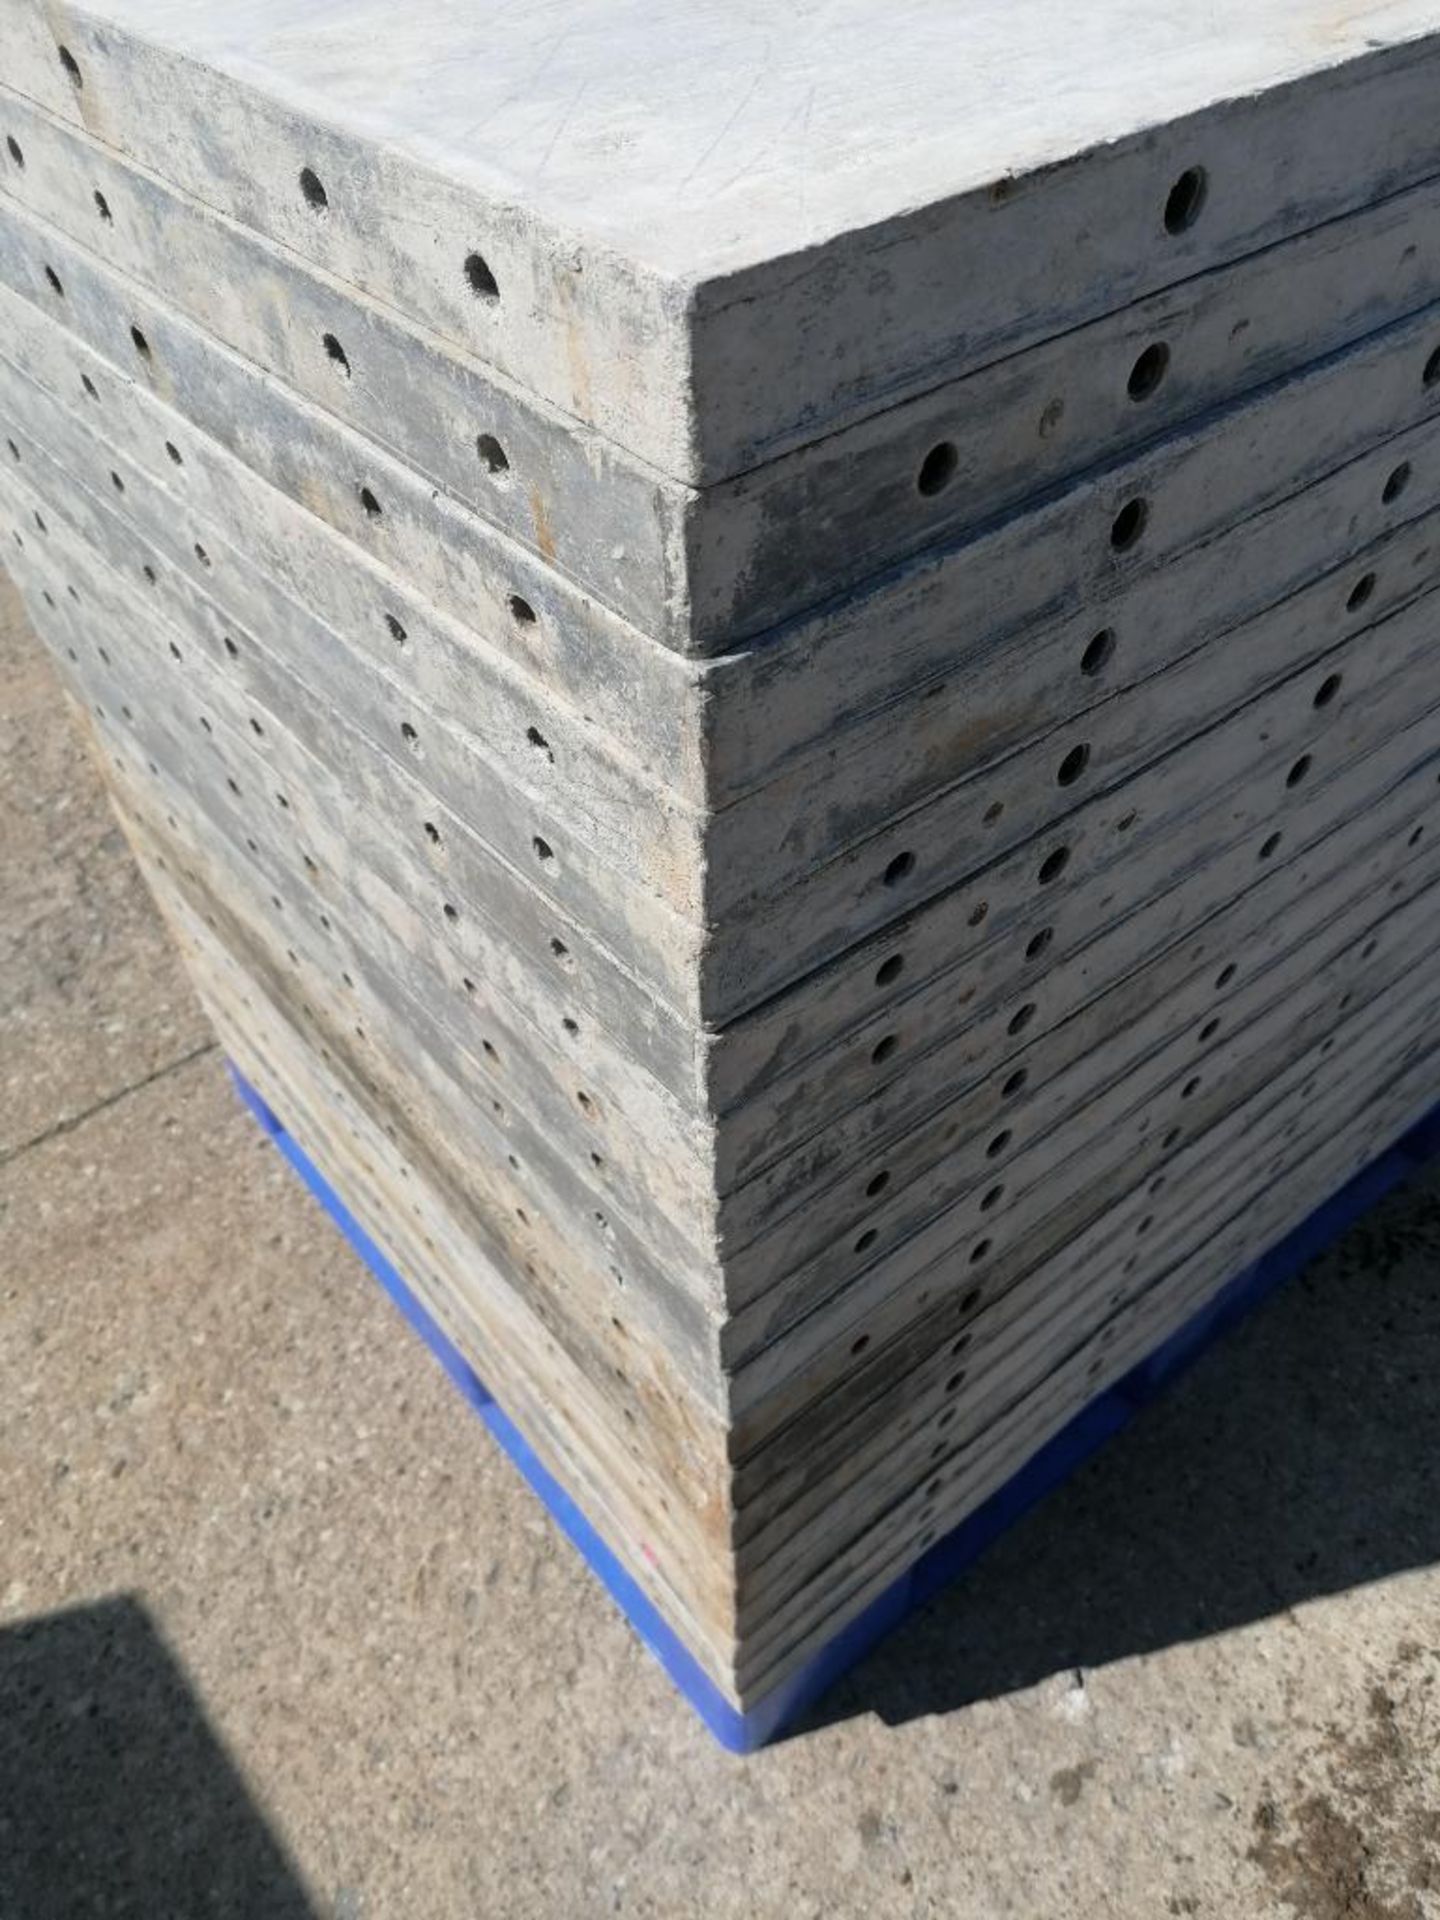 (20) 3' x 4' Wall-Ties Smooth Aluminum Concrete Forms 8" Hole Pattern. Located in Mt. Pleasant, IA. - Image 9 of 10